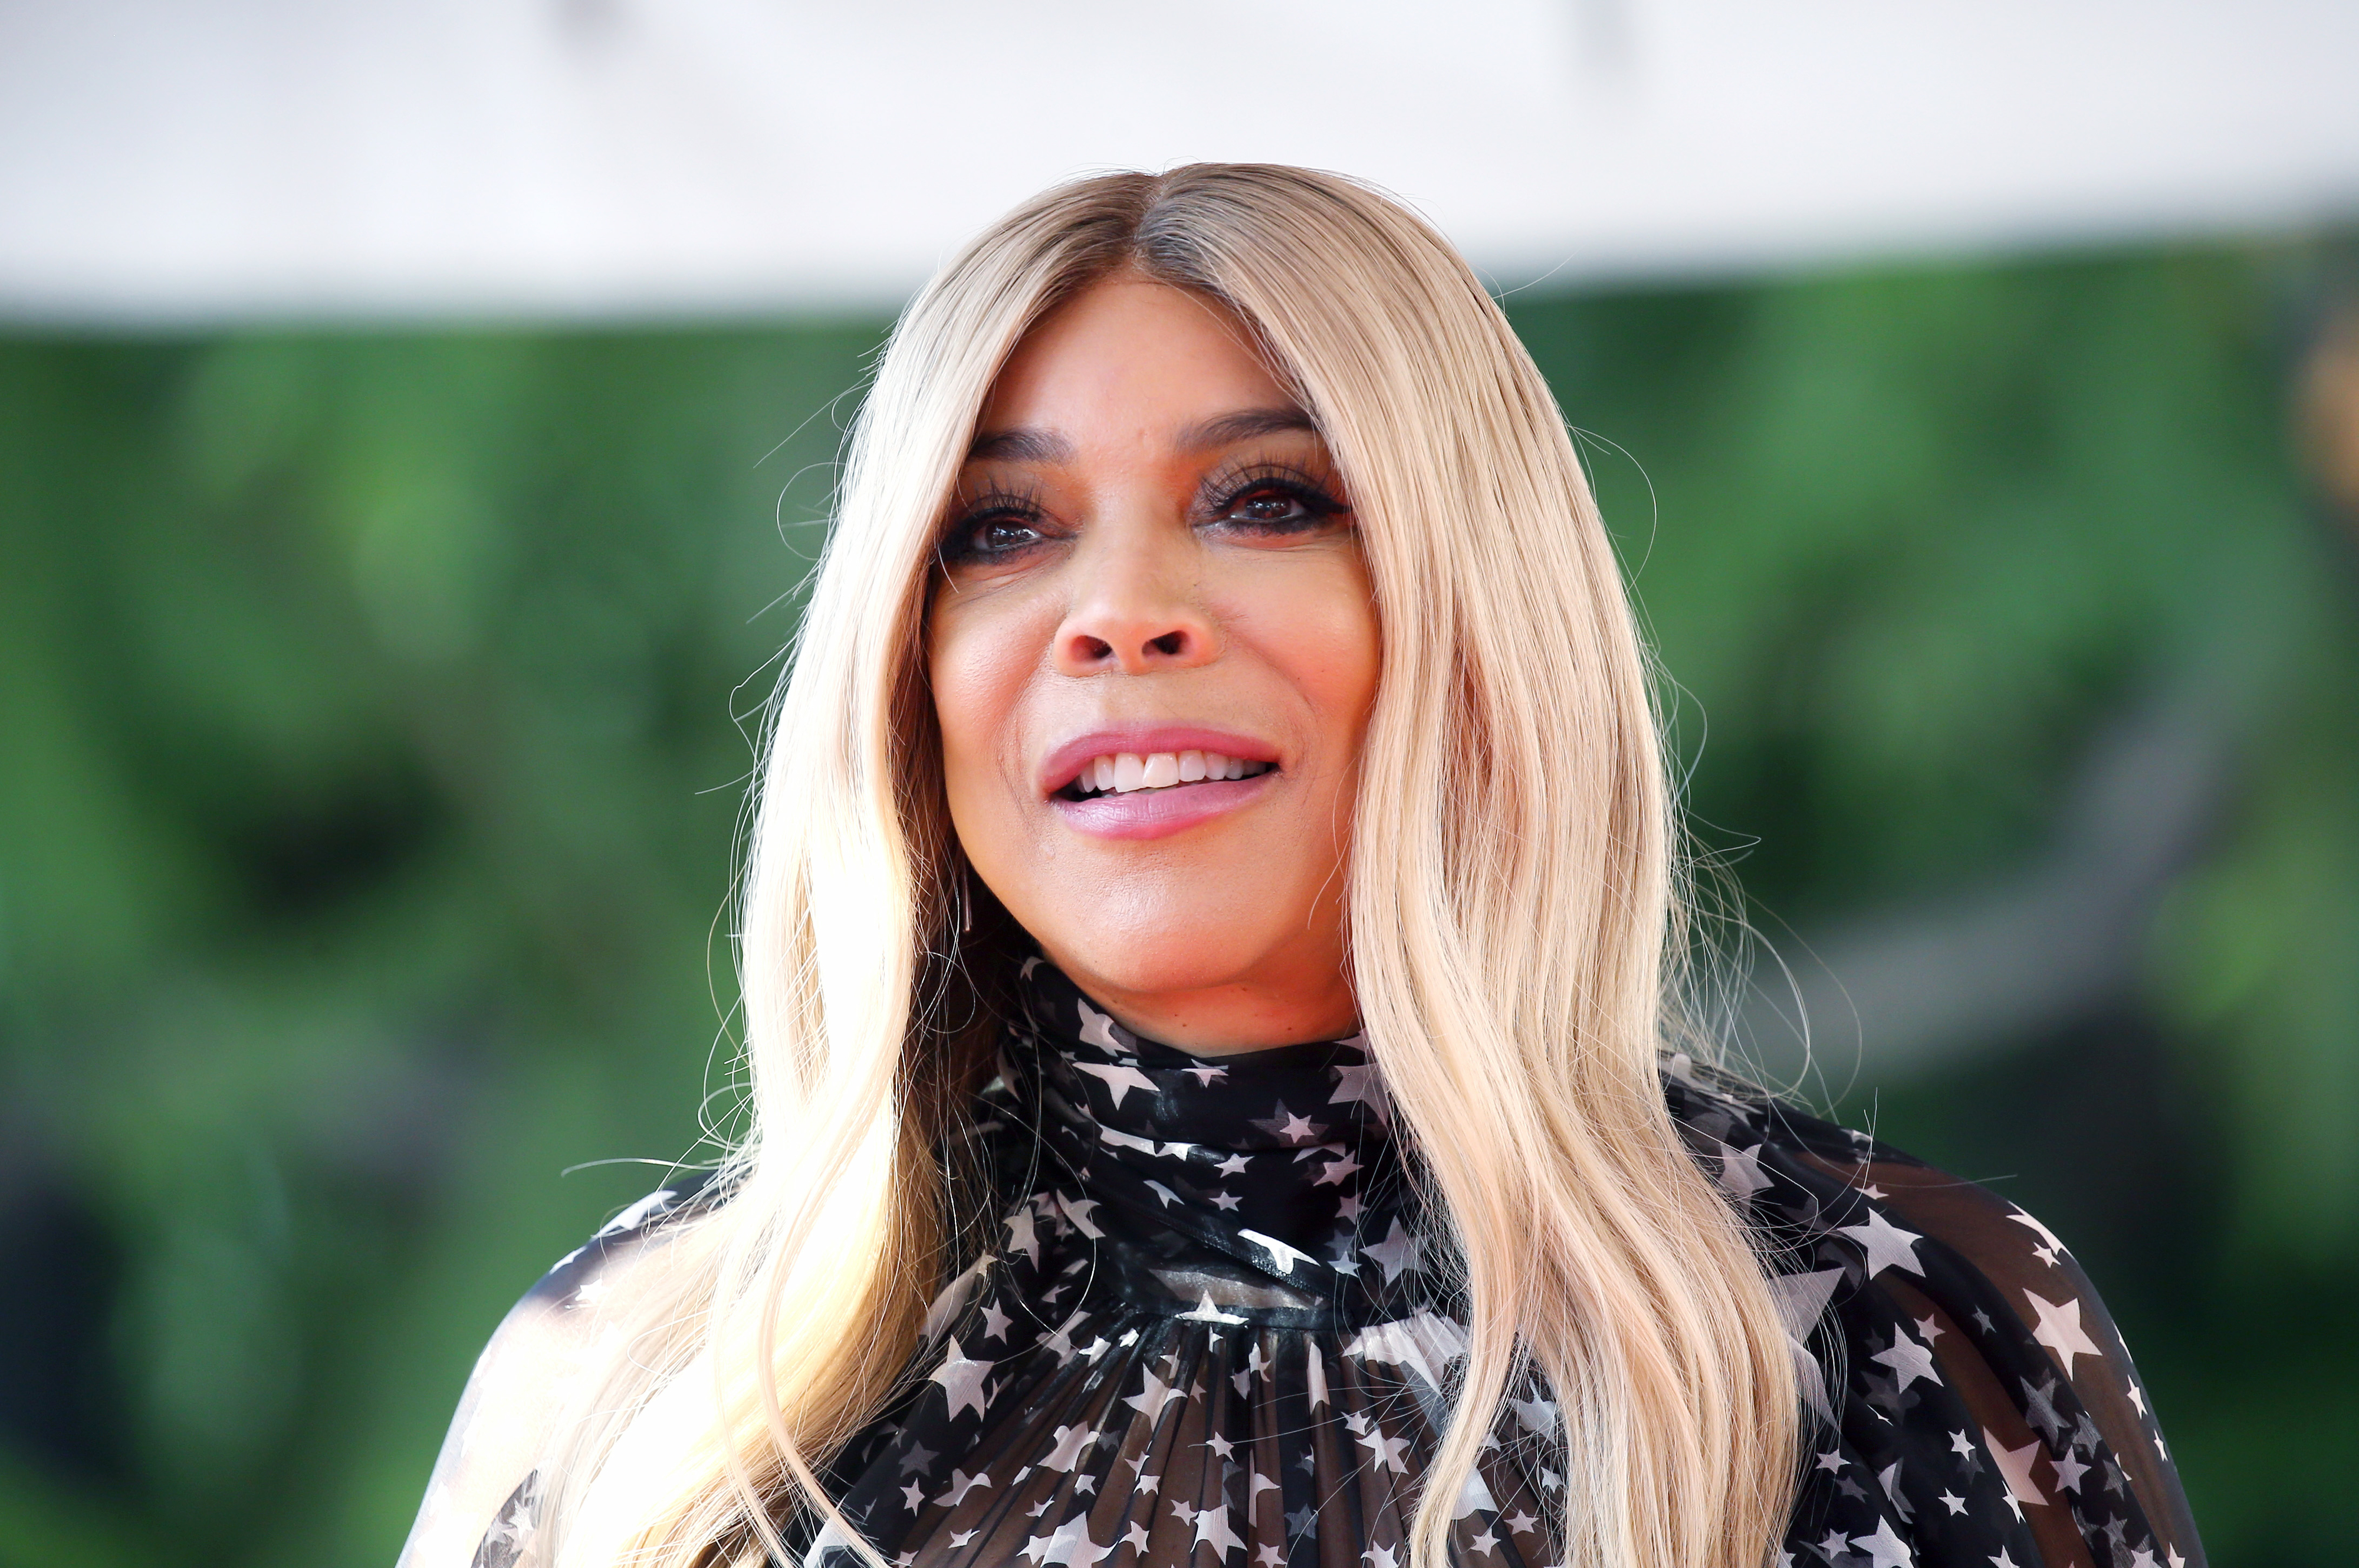 Wendy Williams in a star-patterned outfit